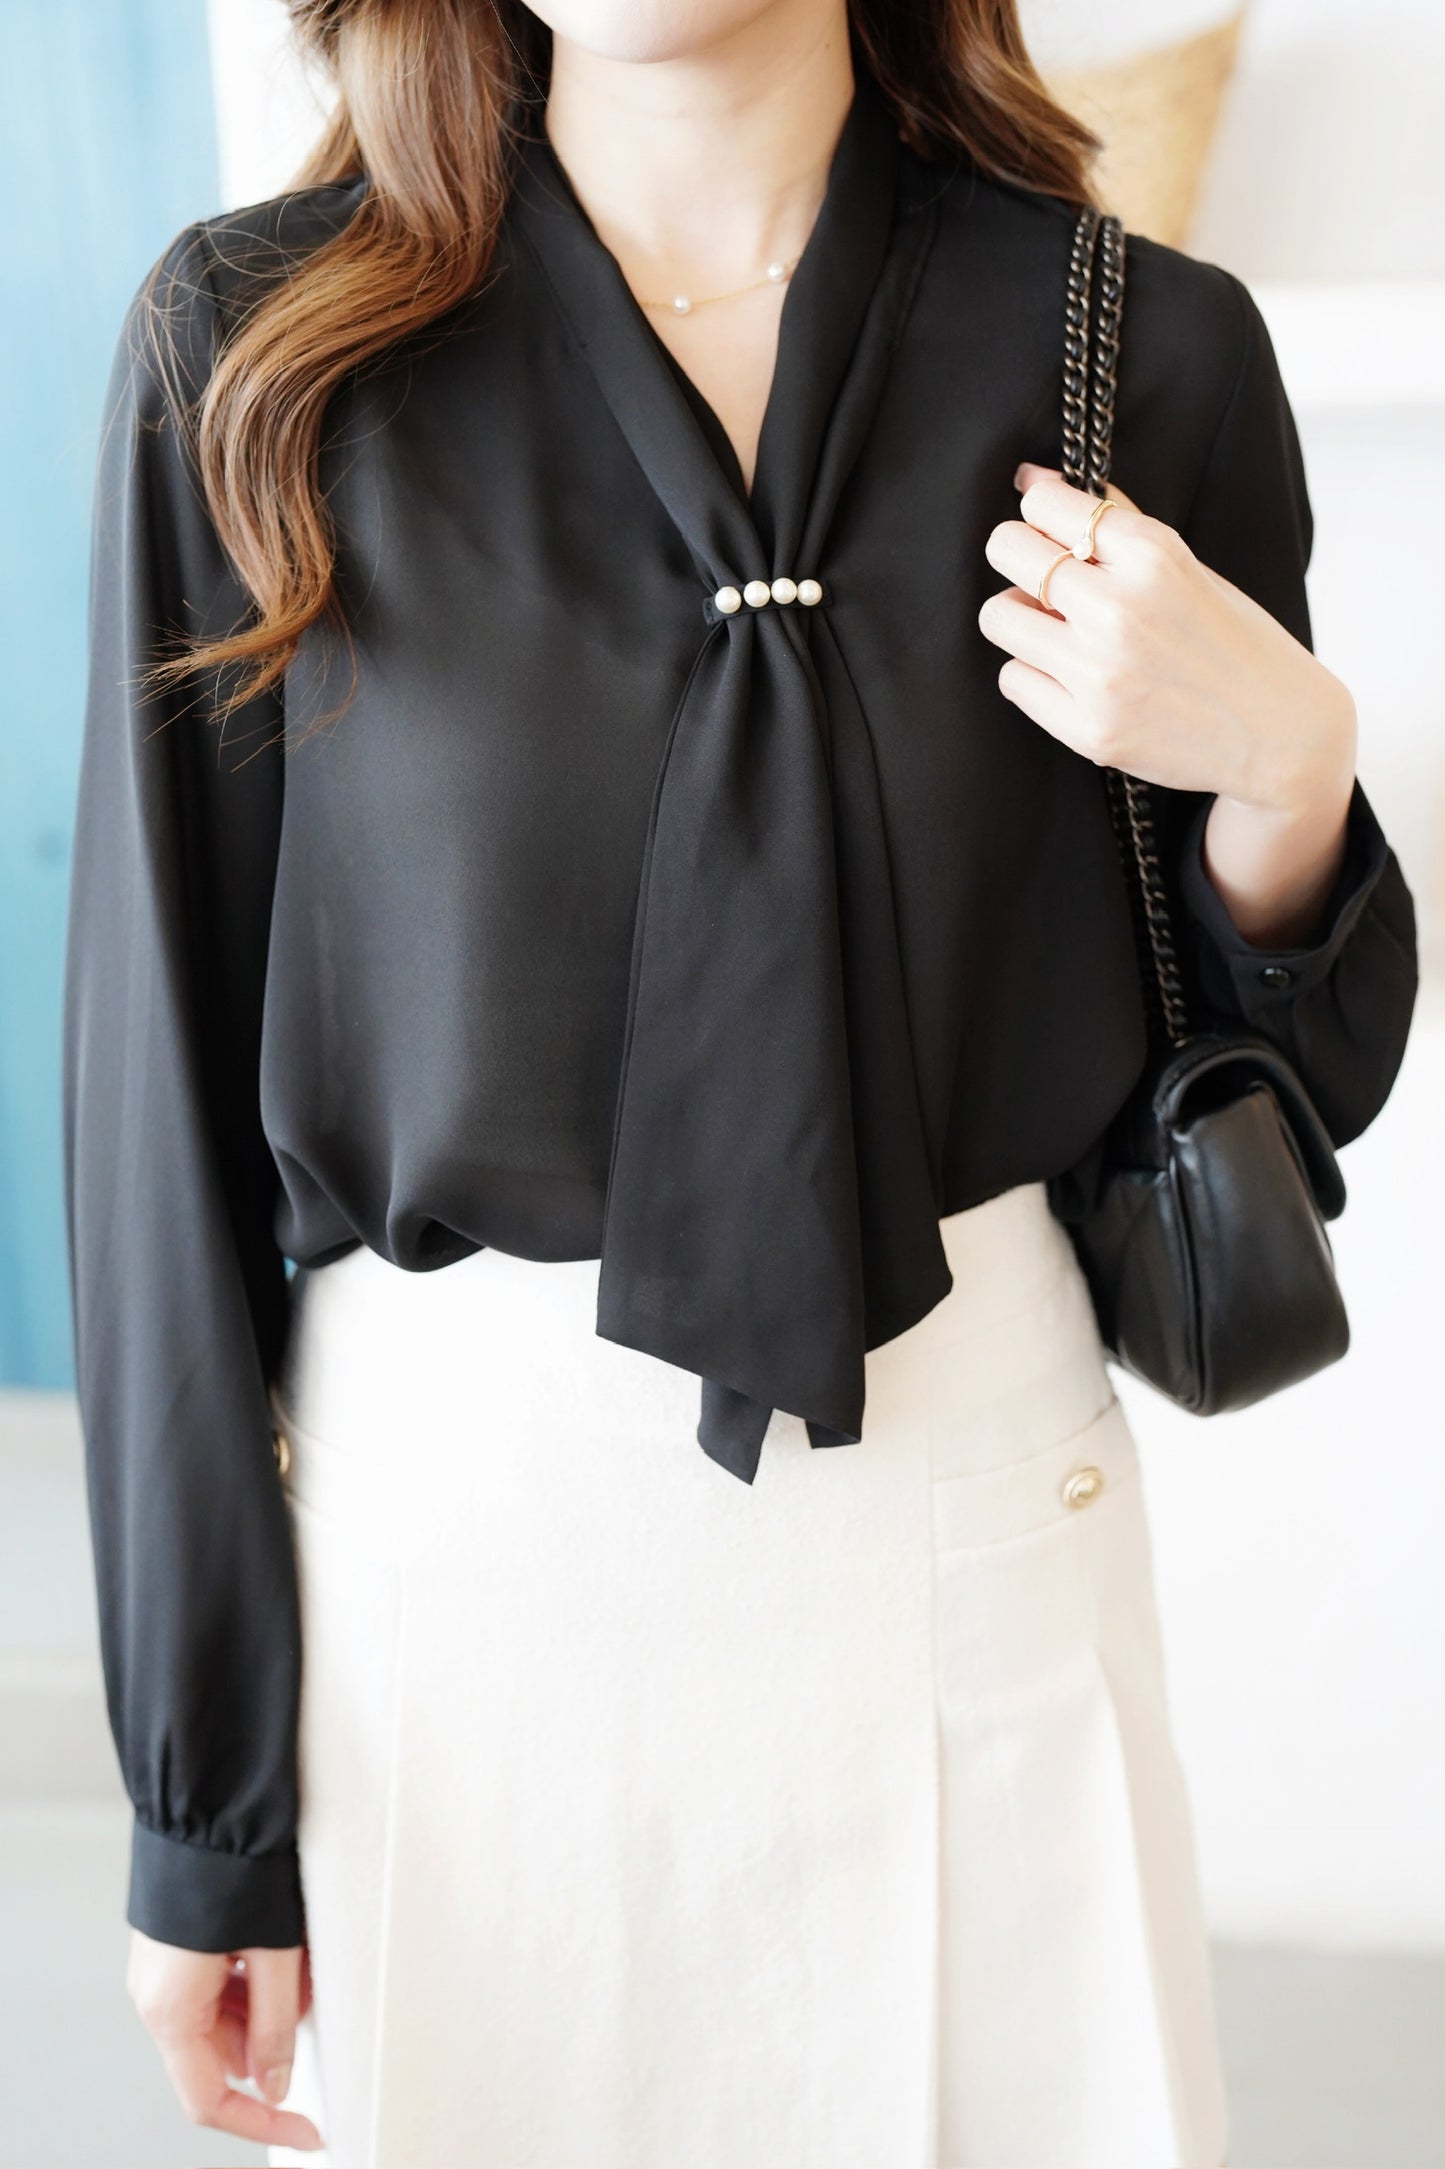 Classy Pearly Tie Blouse